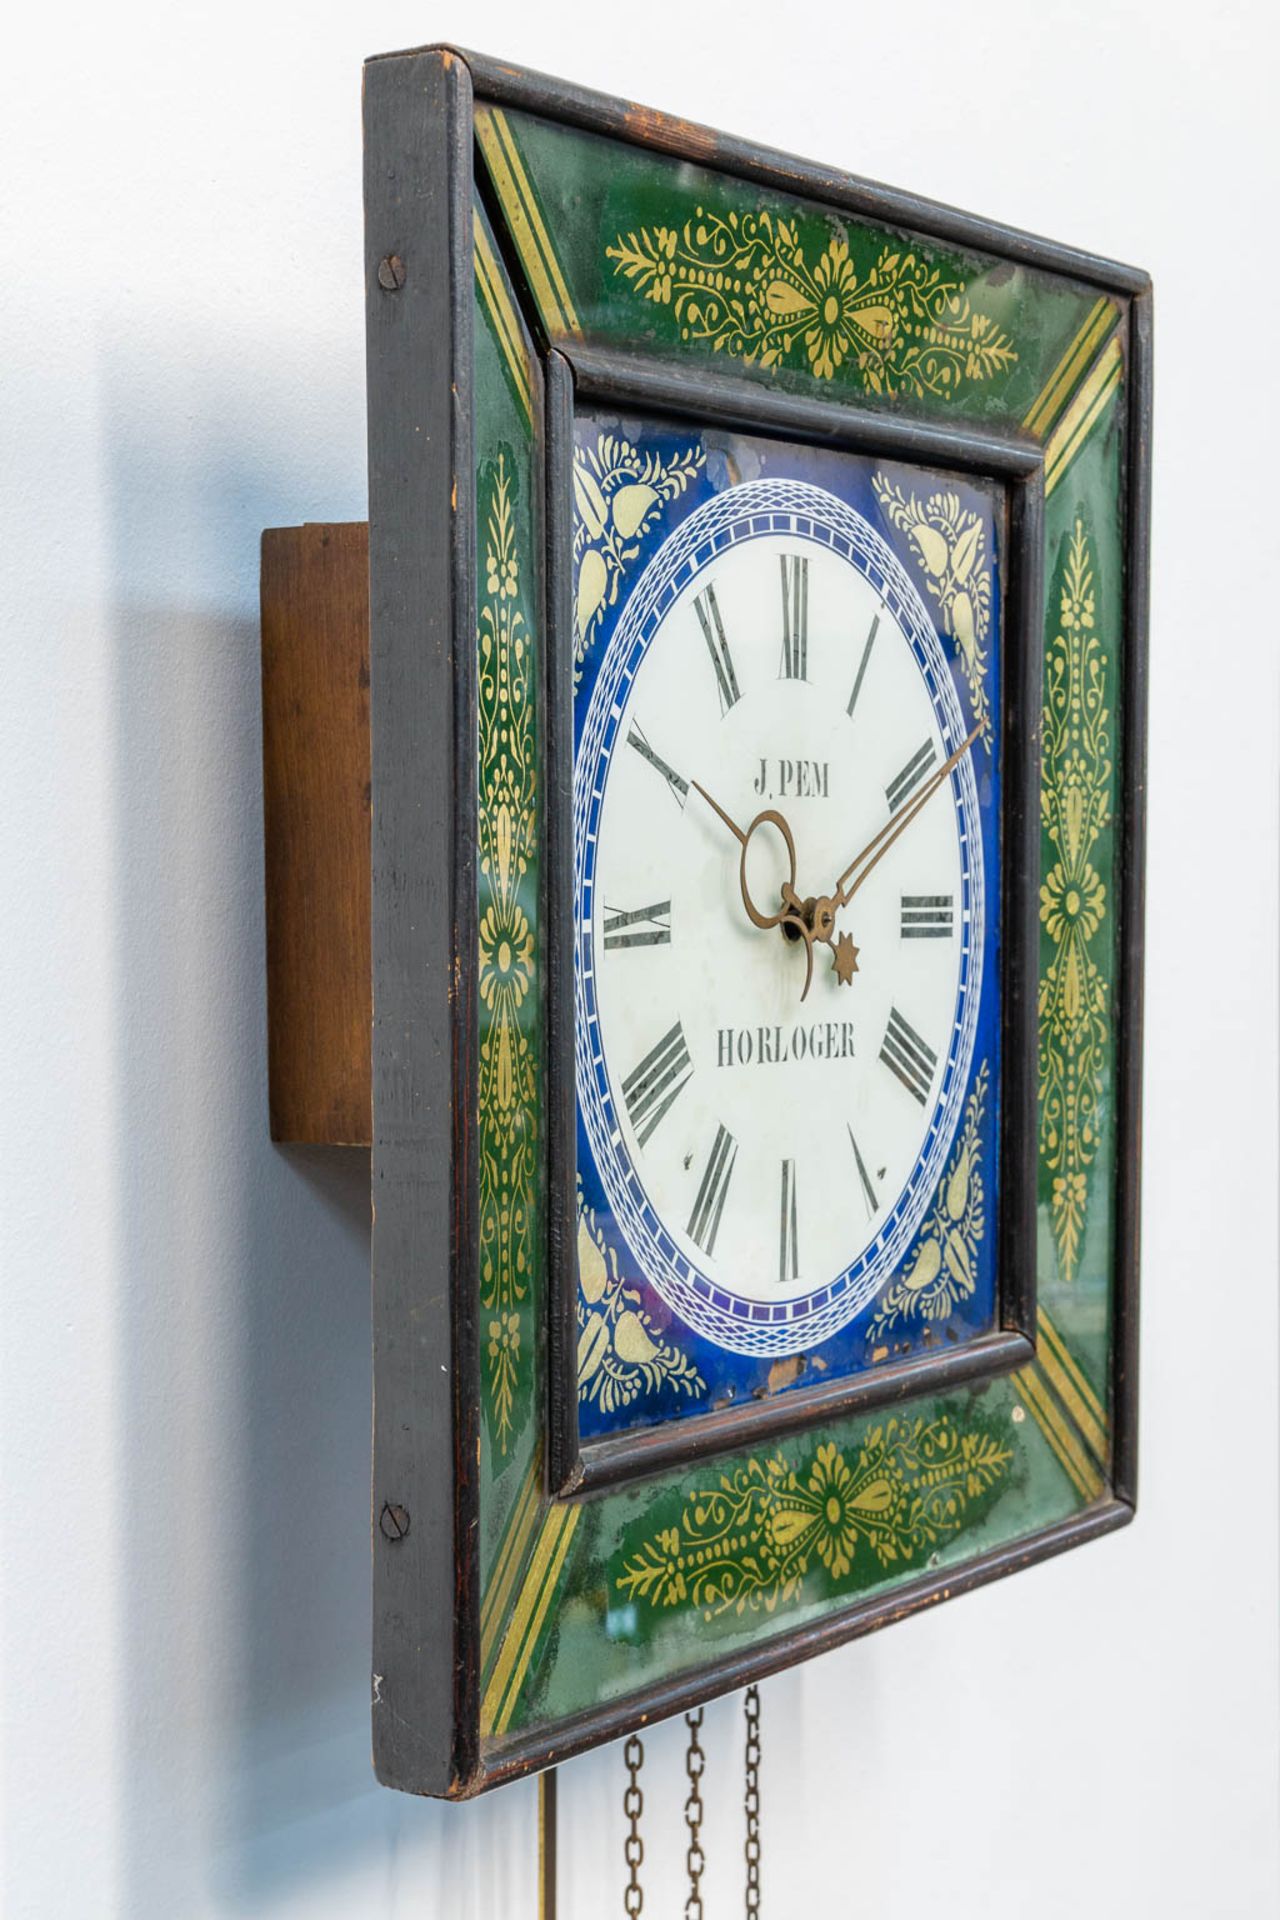 A clock with eglomise reverse glass painting, marked J. Pem Horloger. (12 x 39 x 39 cm) - Image 3 of 8